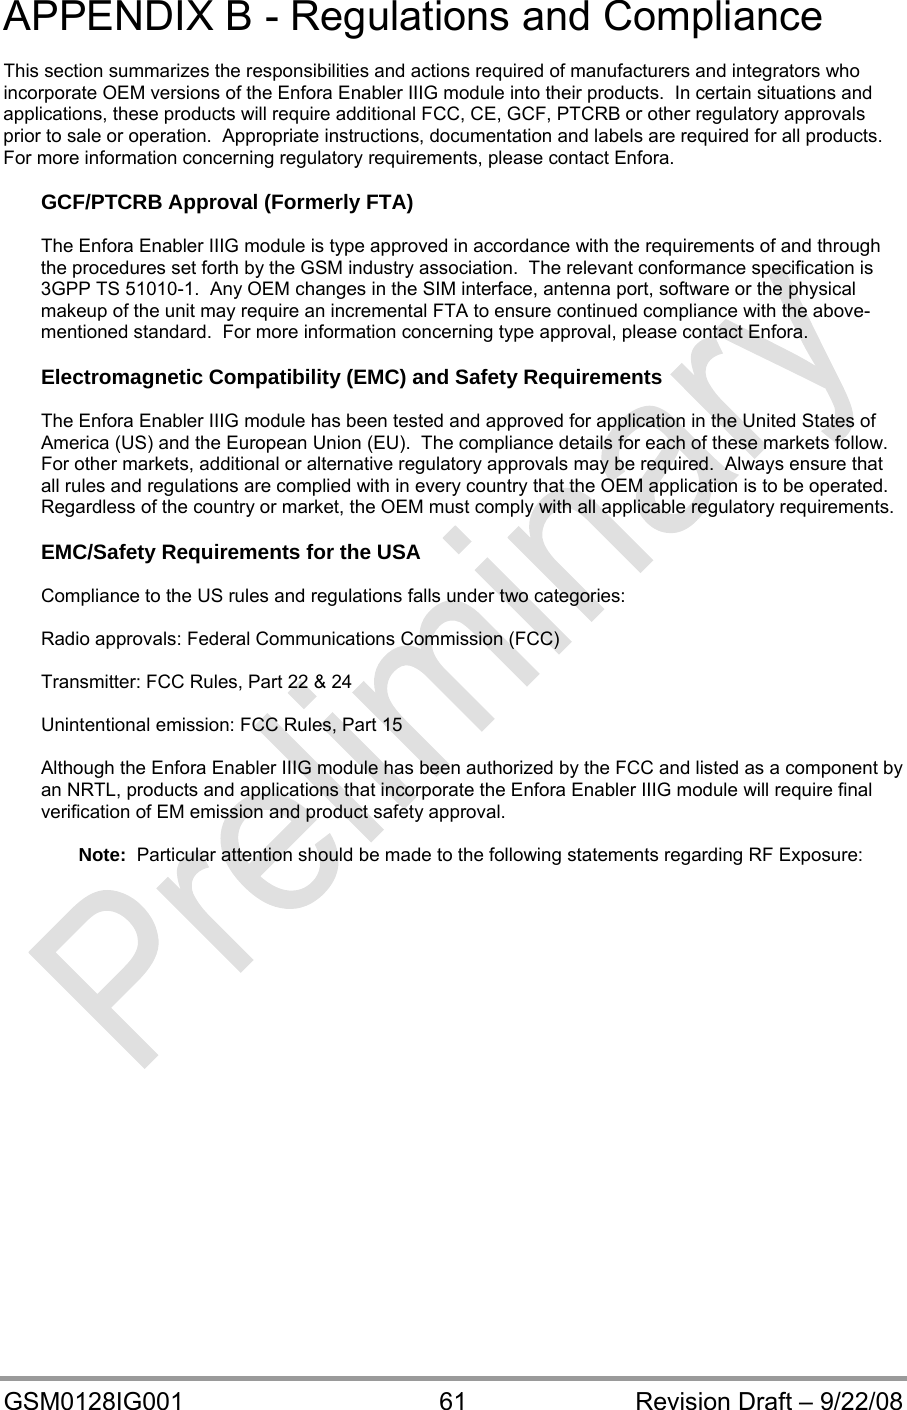  GSM0128IG001  61  Revision Draft – 9/22/08 APPENDIX B - Regulations and Compliance  This section summarizes the responsibilities and actions required of manufacturers and integrators who incorporate OEM versions of the Enfora Enabler IIIG module into their products.  In certain situations and applications, these products will require additional FCC, CE, GCF, PTCRB or other regulatory approvals prior to sale or operation.  Appropriate instructions, documentation and labels are required for all products.  For more information concerning regulatory requirements, please contact Enfora.  GCF/PTCRB Approval (Formerly FTA)  The Enfora Enabler IIIG module is type approved in accordance with the requirements of and through the procedures set forth by the GSM industry association.  The relevant conformance specification is 3GPP TS 51010-1.  Any OEM changes in the SIM interface, antenna port, software or the physical makeup of the unit may require an incremental FTA to ensure continued compliance with the above-mentioned standard.  For more information concerning type approval, please contact Enfora.  Electromagnetic Compatibility (EMC) and Safety Requirements  The Enfora Enabler IIIG module has been tested and approved for application in the United States of America (US) and the European Union (EU).  The compliance details for each of these markets follow.  For other markets, additional or alternative regulatory approvals may be required.  Always ensure that all rules and regulations are complied with in every country that the OEM application is to be operated.  Regardless of the country or market, the OEM must comply with all applicable regulatory requirements.  EMC/Safety Requirements for the USA  Compliance to the US rules and regulations falls under two categories:  Radio approvals: Federal Communications Commission (FCC)  Transmitter: FCC Rules, Part 22 &amp; 24  Unintentional emission: FCC Rules, Part 15  Although the Enfora Enabler IIIG module has been authorized by the FCC and listed as a component by an NRTL, products and applications that incorporate the Enfora Enabler IIIG module will require final verification of EM emission and product safety approval.  Note:  Particular attention should be made to the following statements regarding RF Exposure: 